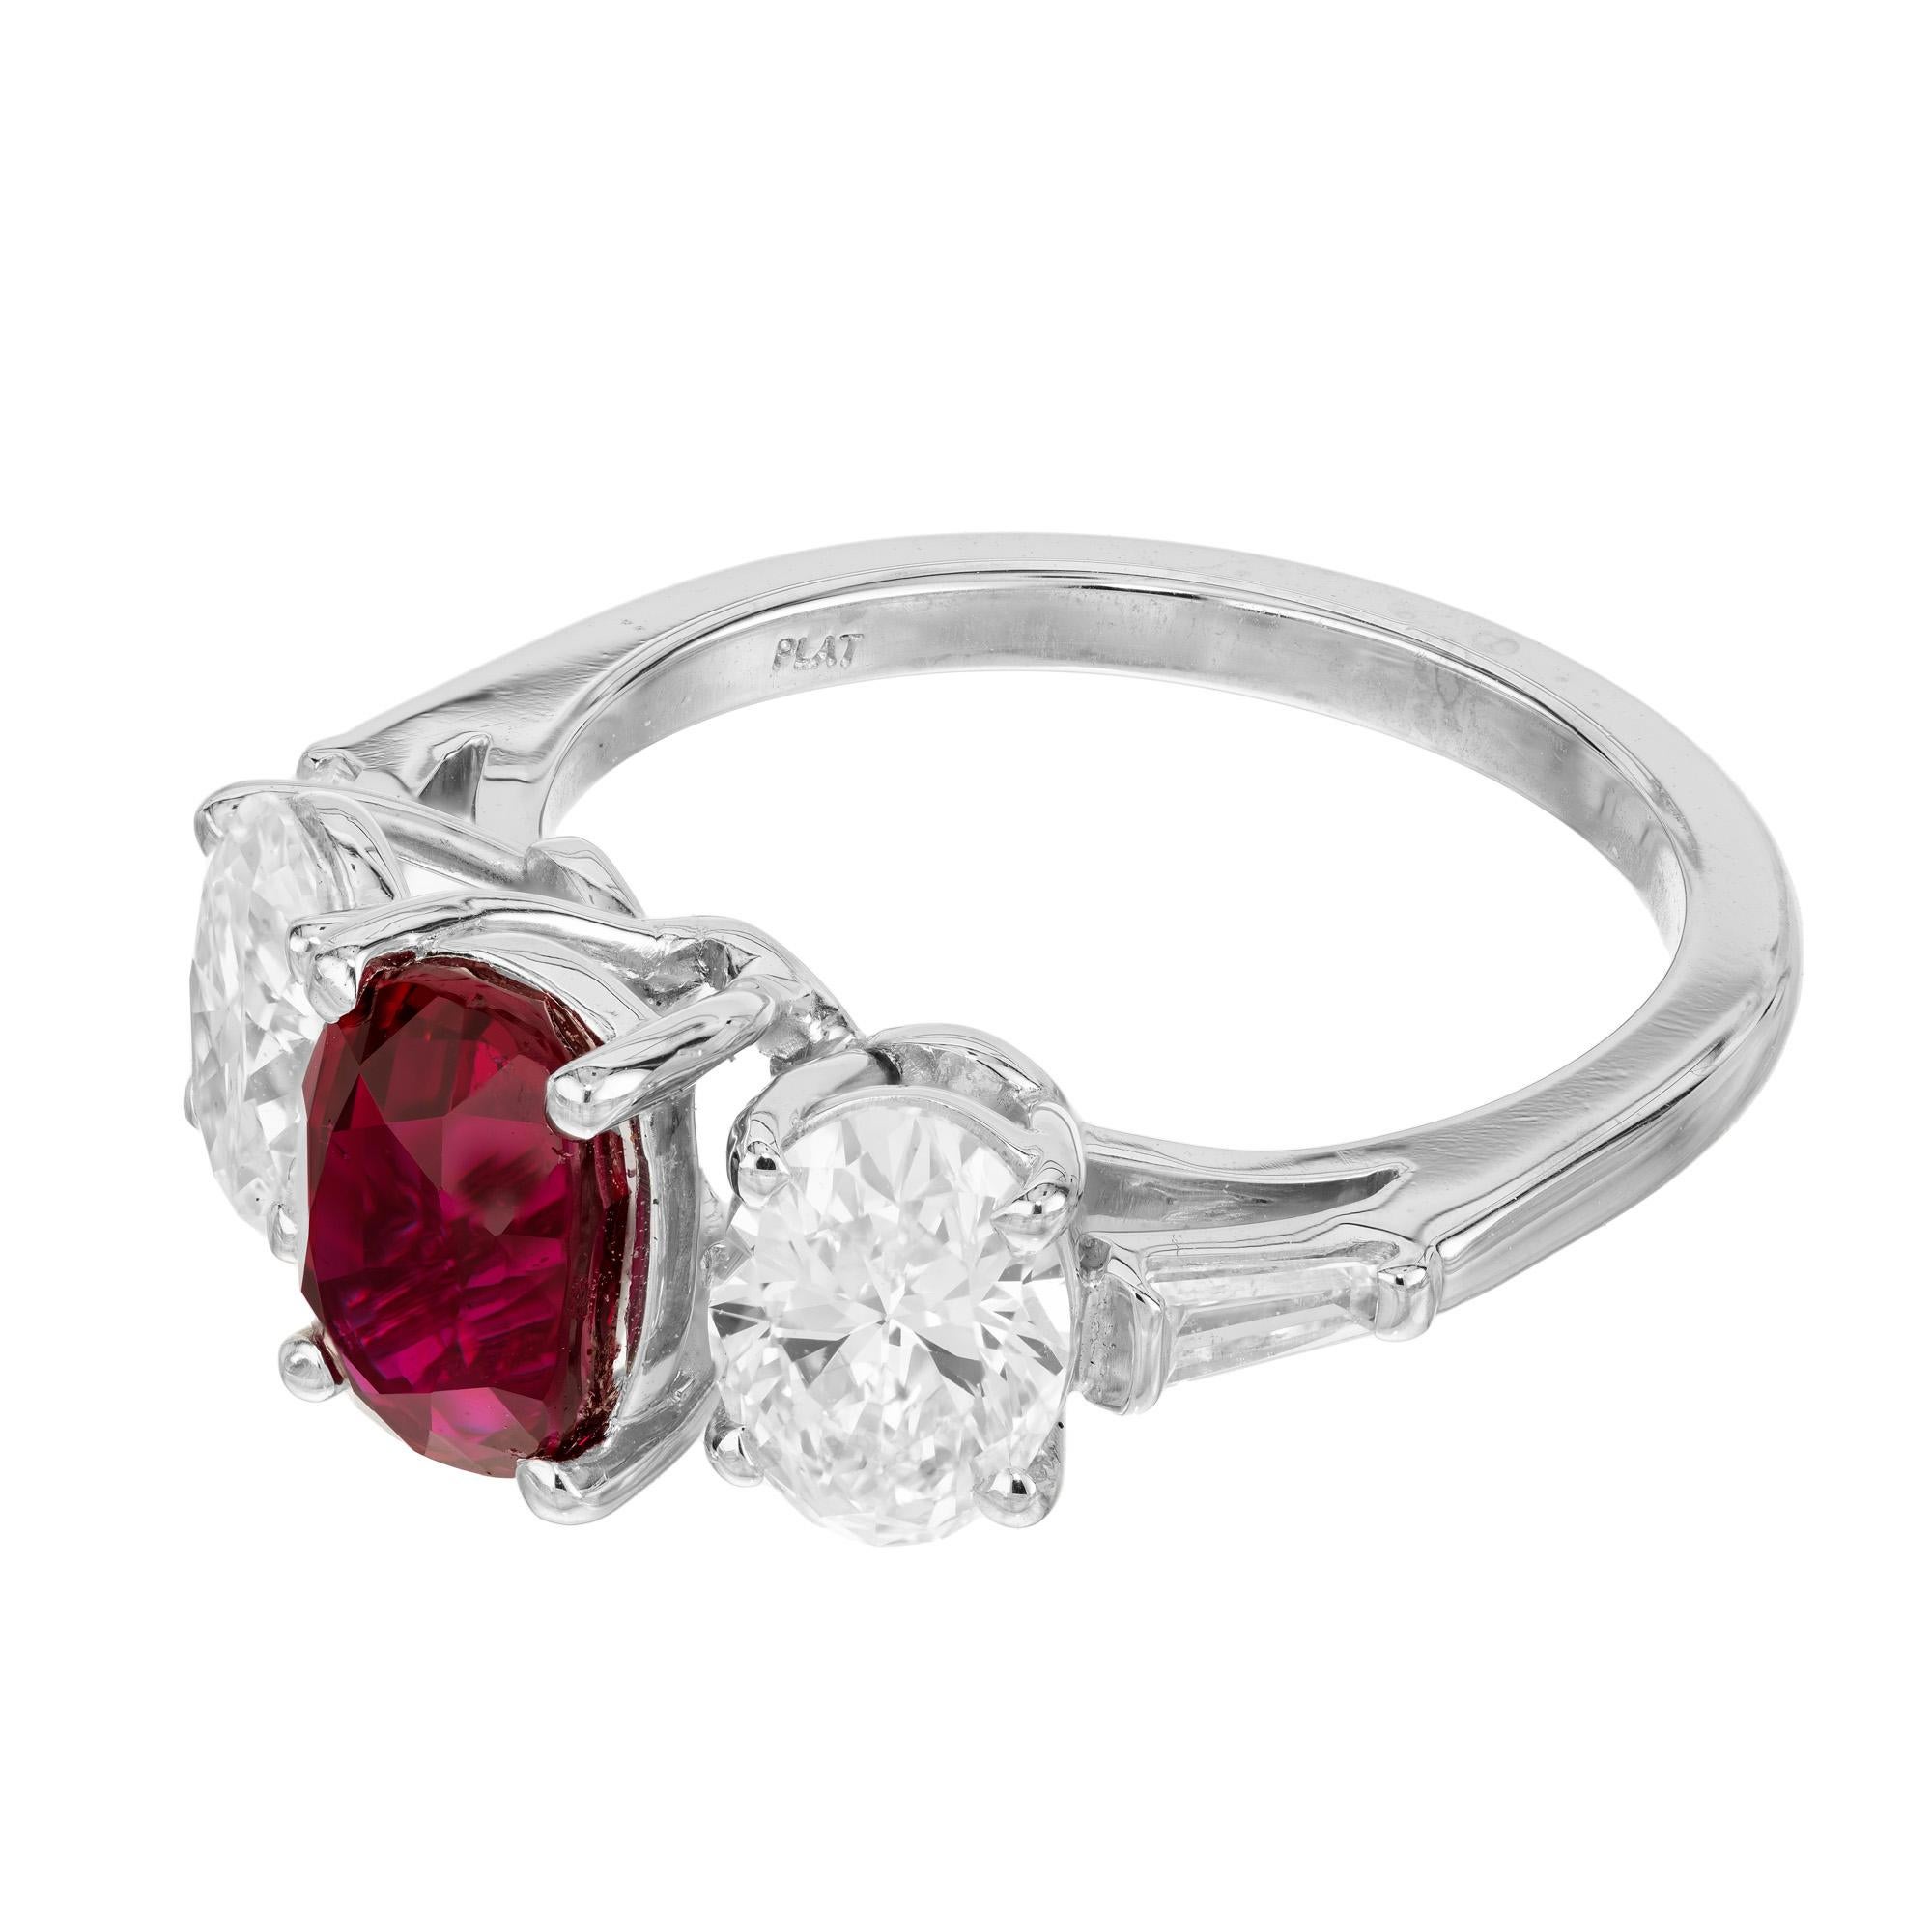 Oval Cut Peter Suchy GIA Certified 2.02 Carat Oval Ruby Diamond Three-Stone Platinum Ring For Sale